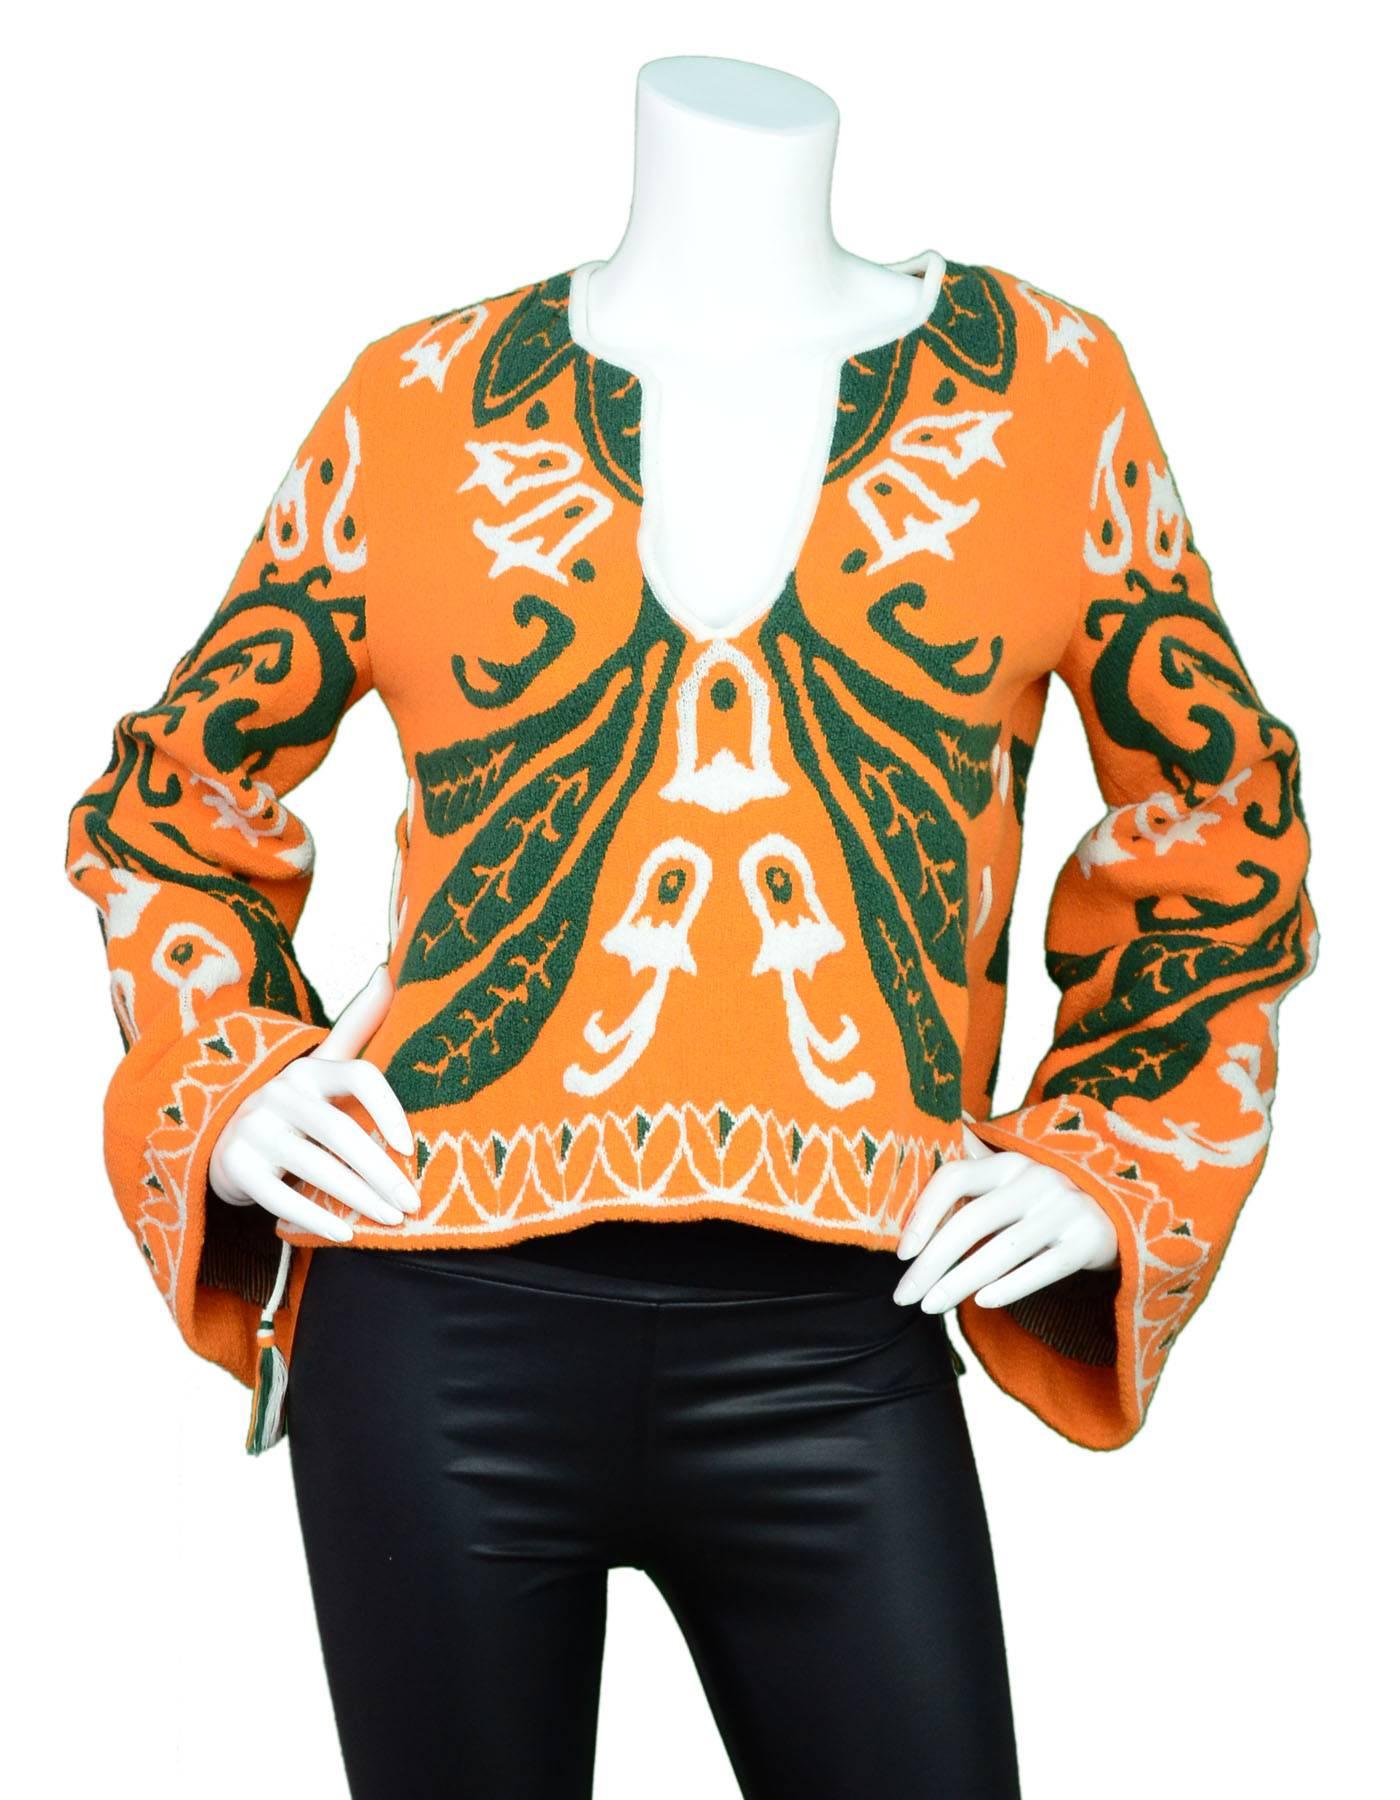 Emilio Pucci Orange Bell Sleeve Top Sz S

Features lace-up sides

Made In: Italy
Color: Orange, green, white
Composition: 80% cotton, 20% polyamide
Lining: None
Closure/Opening: Pullover
Overall Condition: Excellent pre-owned condition
Inclued: